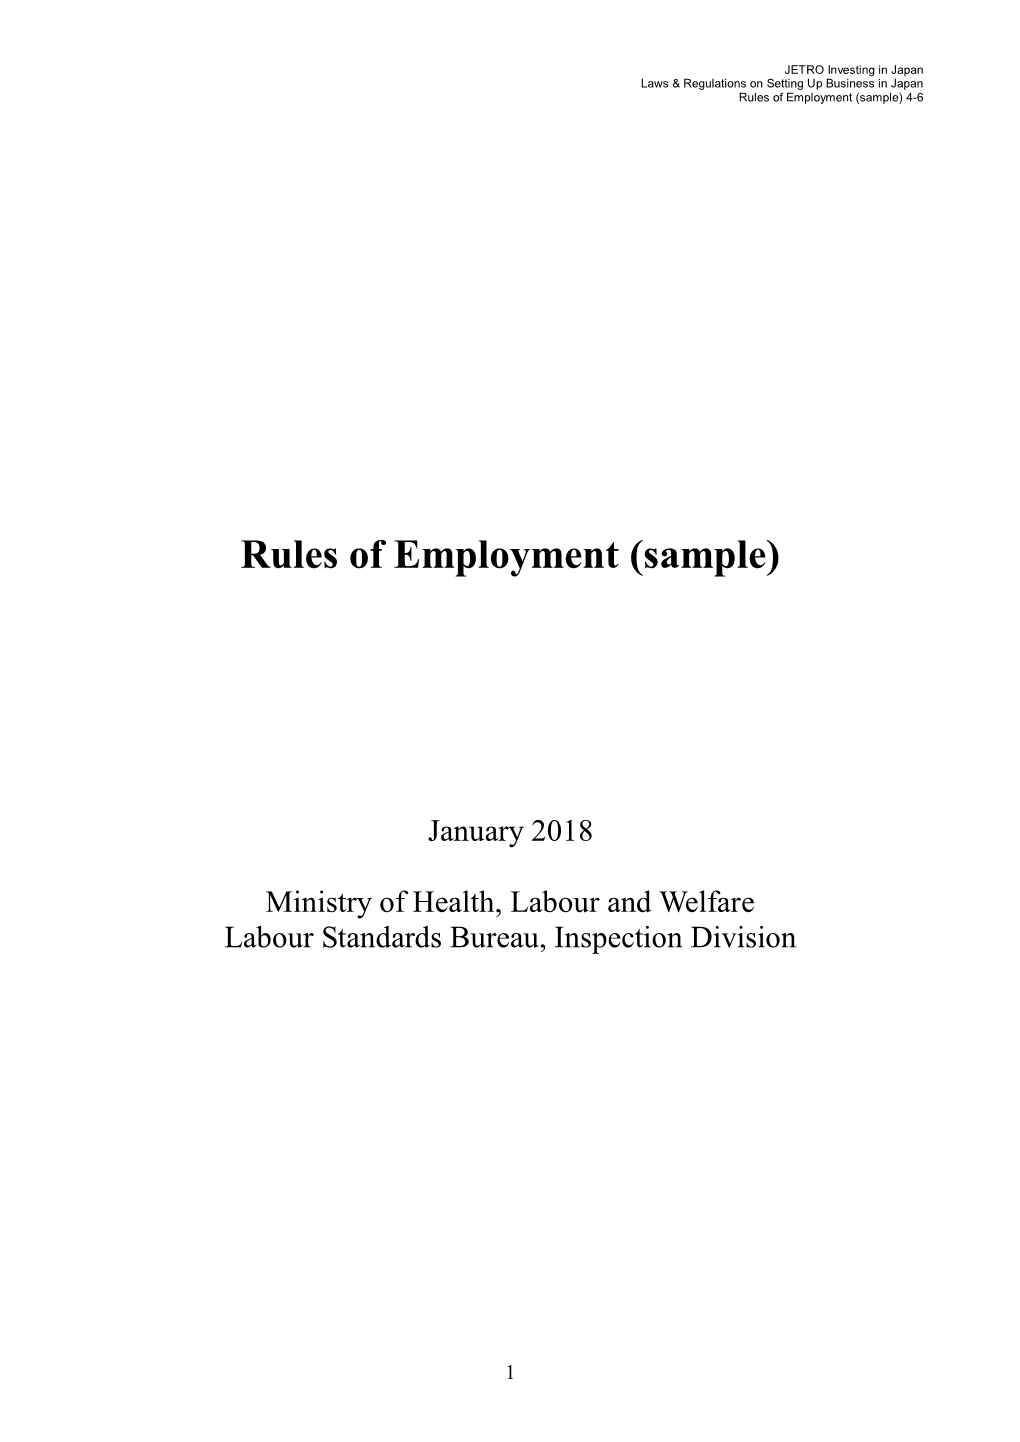 Rules of Employment (Sample) 4-6